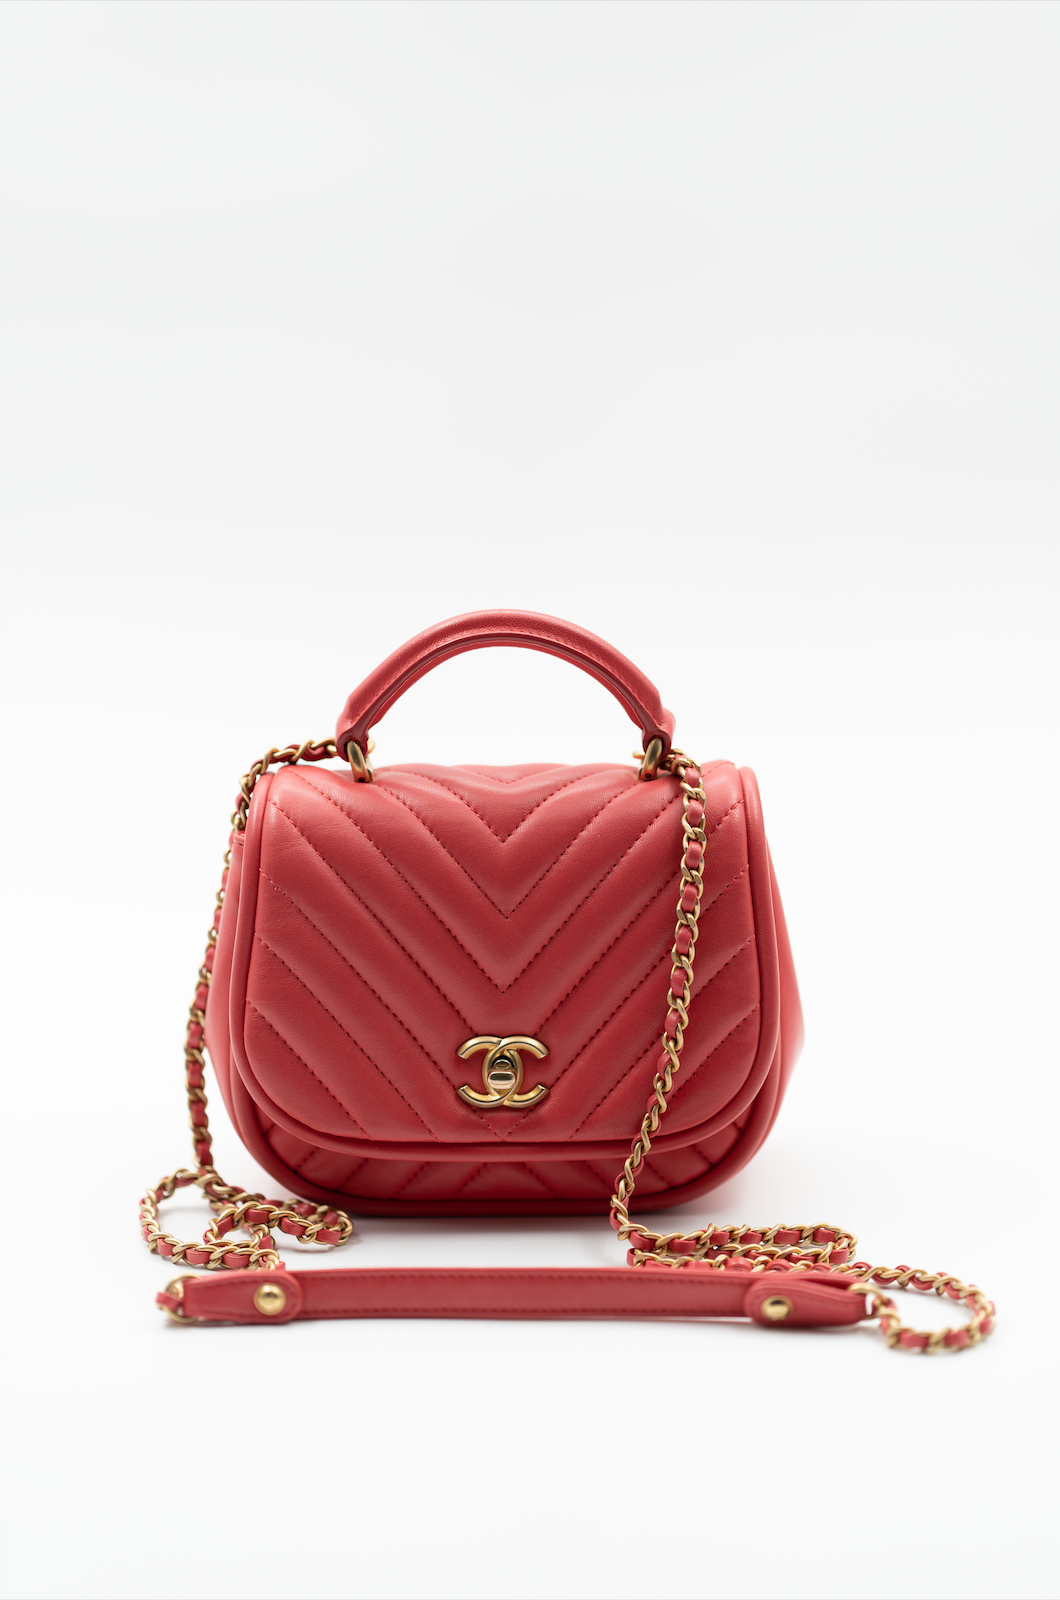 Chanel 2017 reversed chevron round flap bag in coral